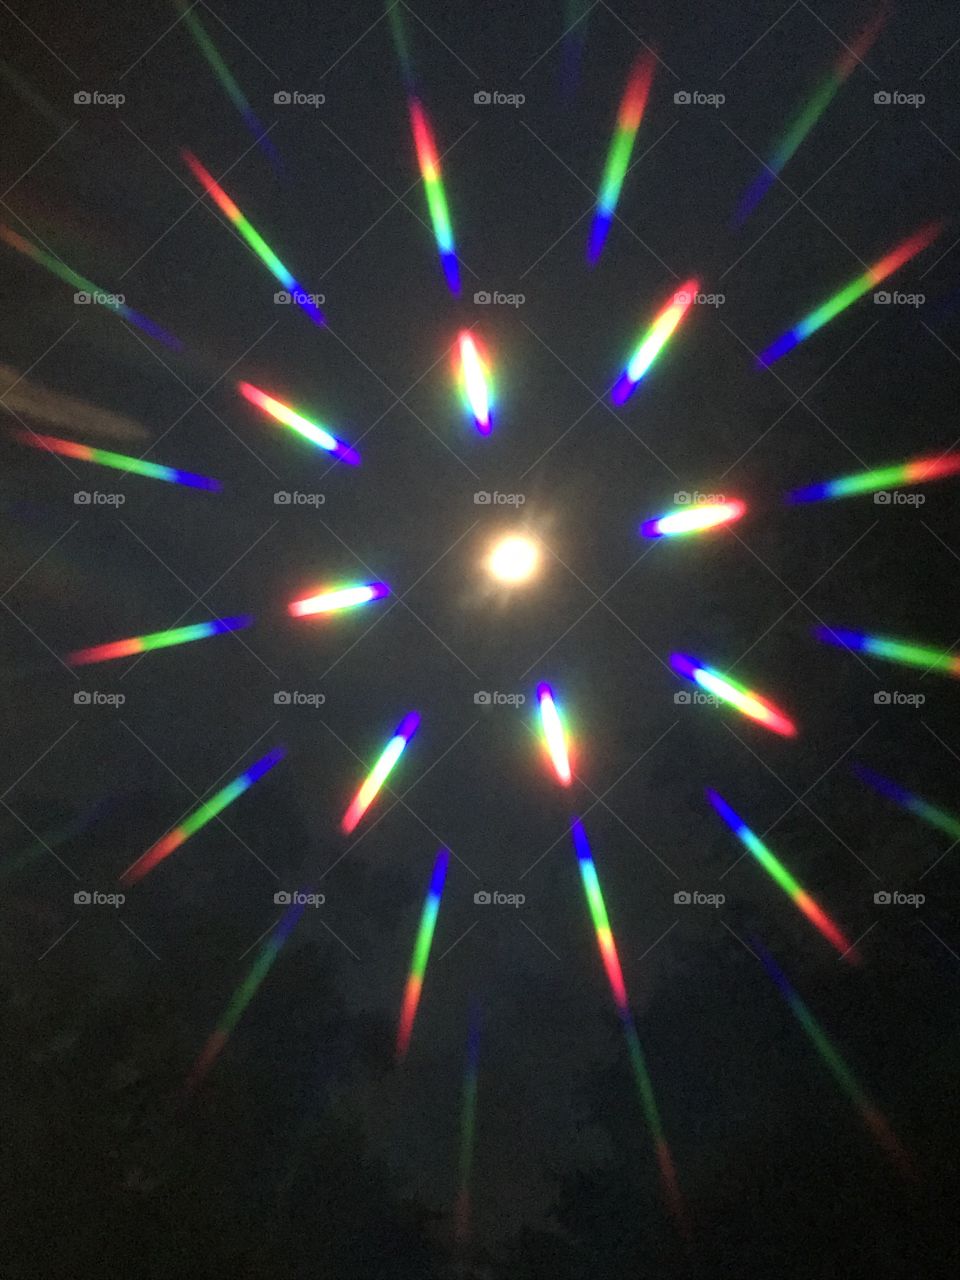 June 24, 2018 Moon beams as seen through a 3D lens. Shine on mighty moon. That is the moon in the center of the lights 